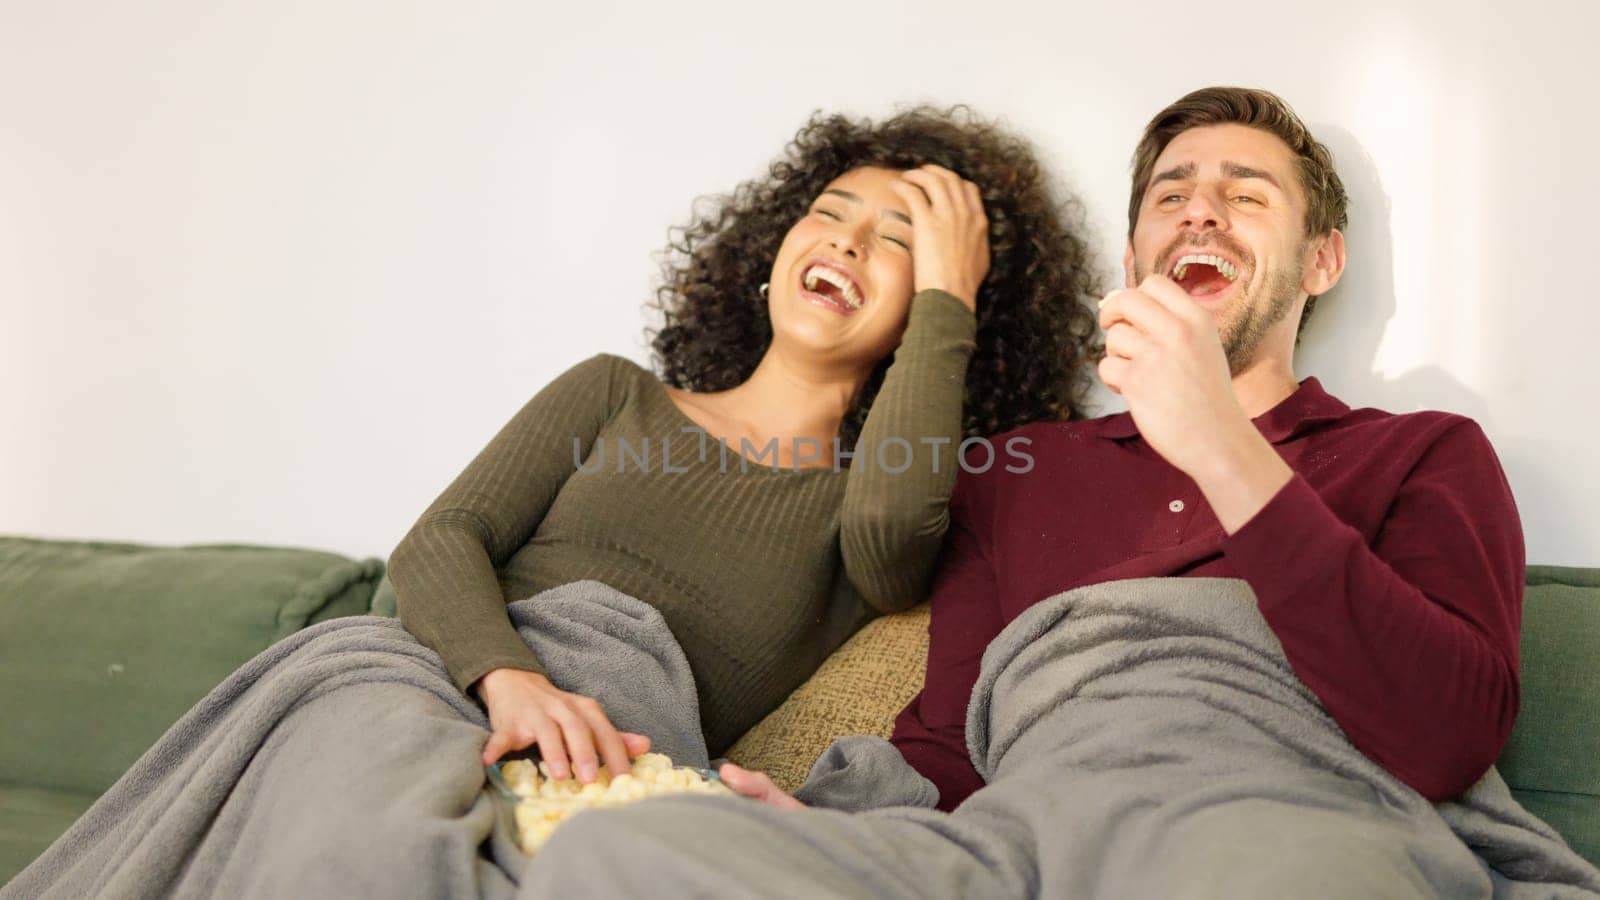 Couple laughing while watching fun film at home by ivanmoreno